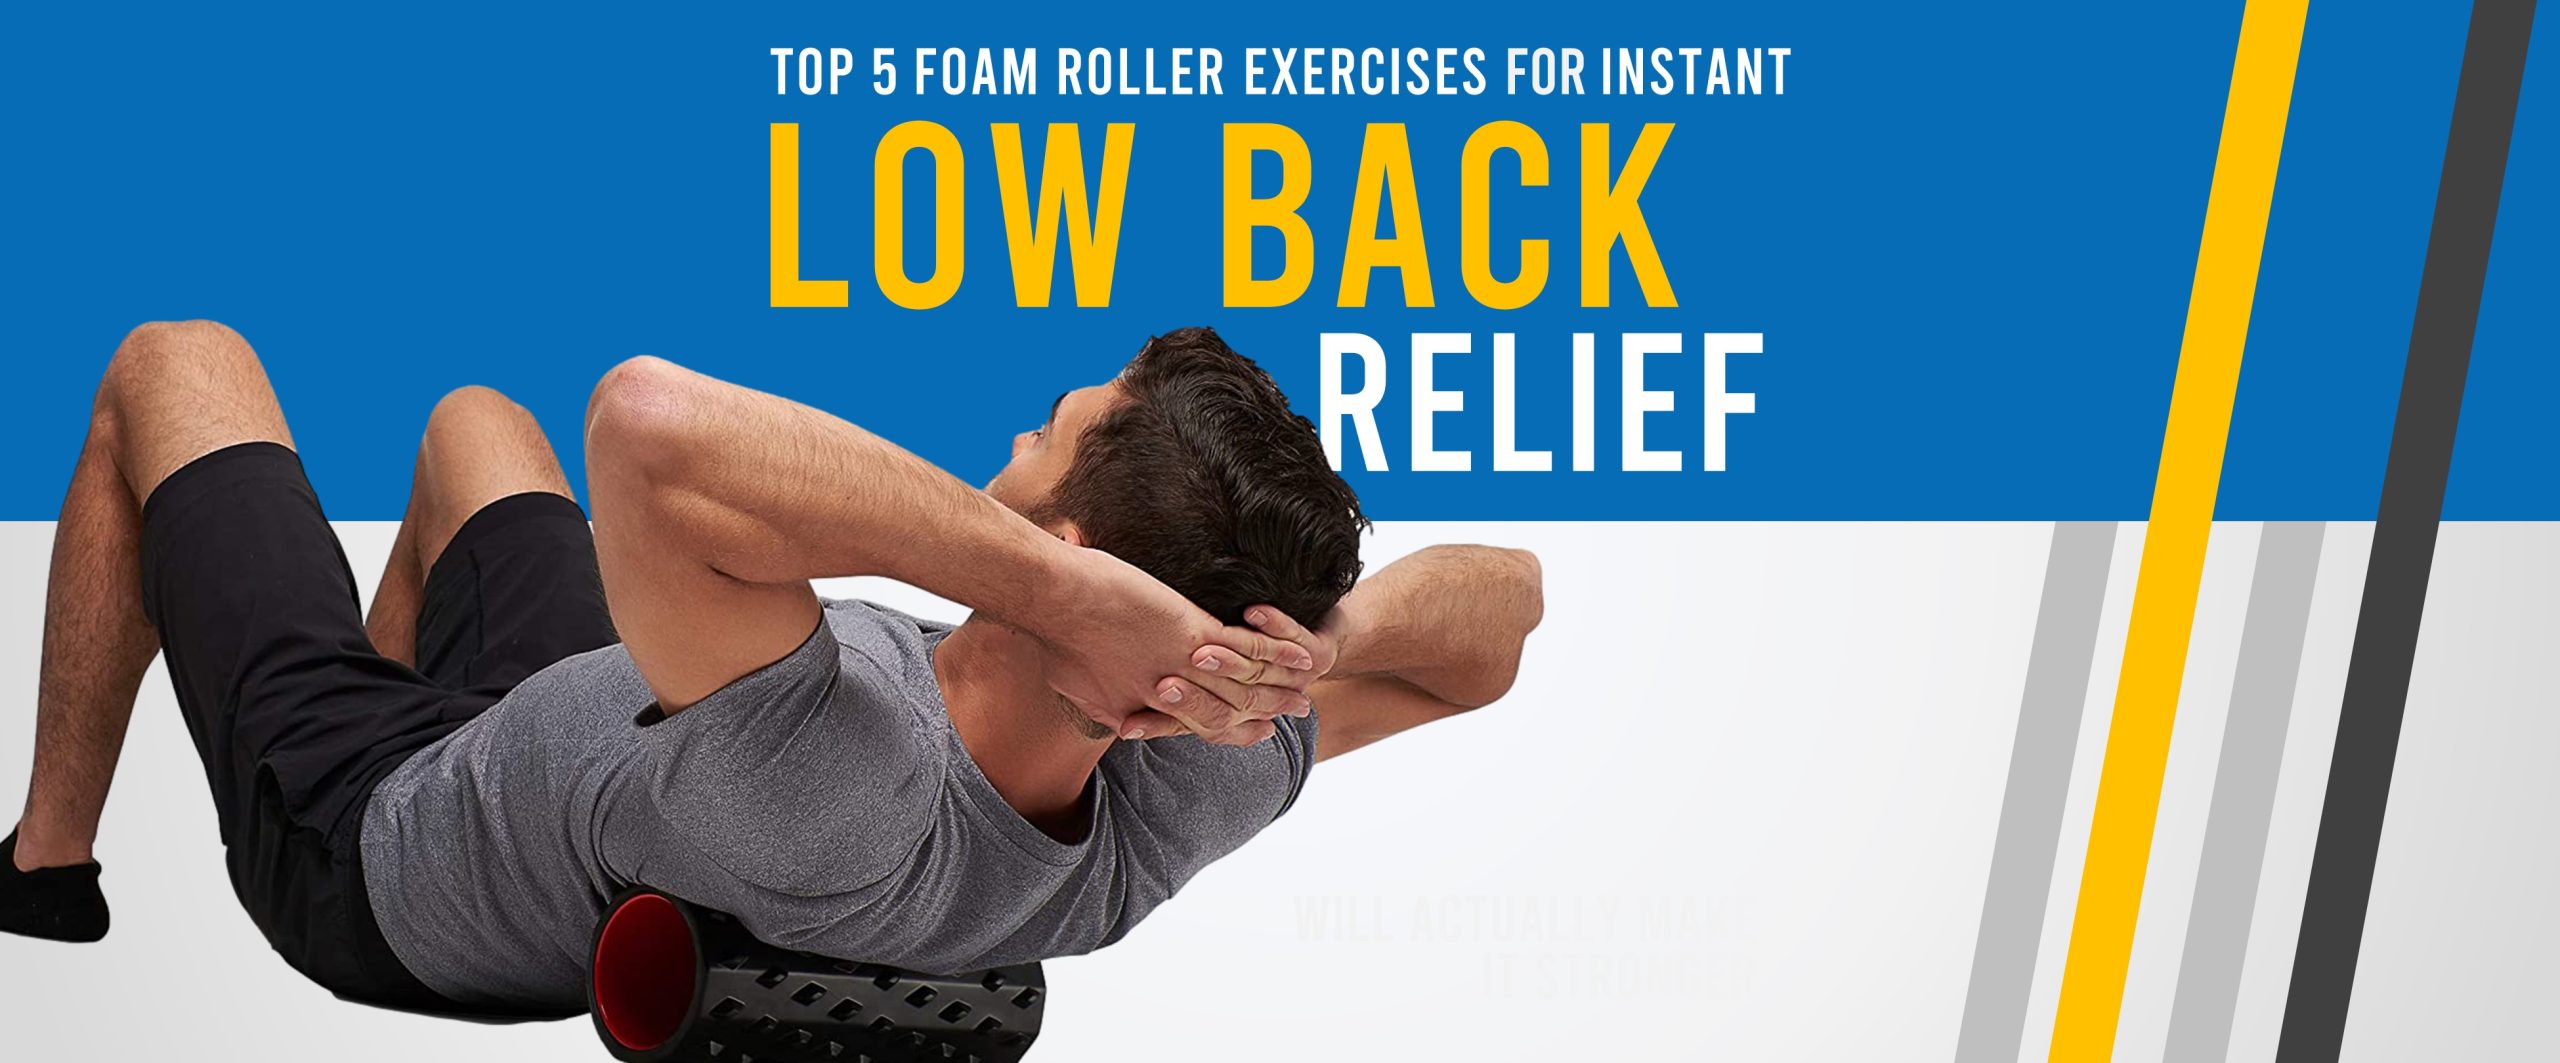 back pain - Upper and Lower Back Pain Relief Exercises